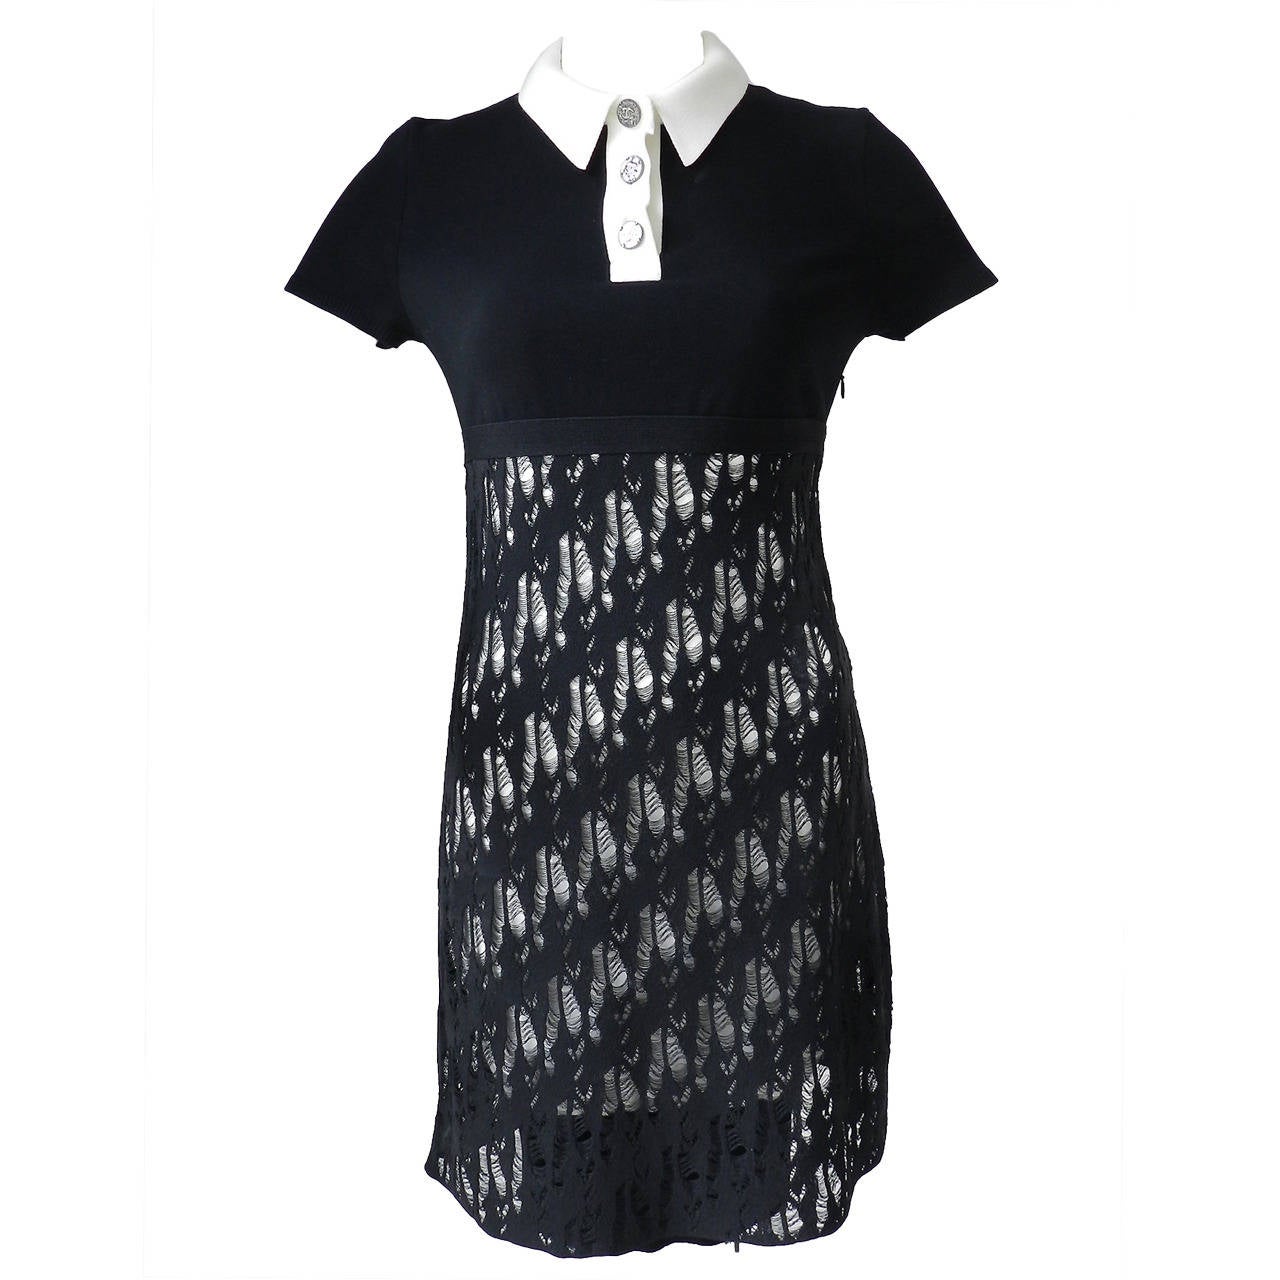 Chanel Black White Polo Dress with Lace Overlay